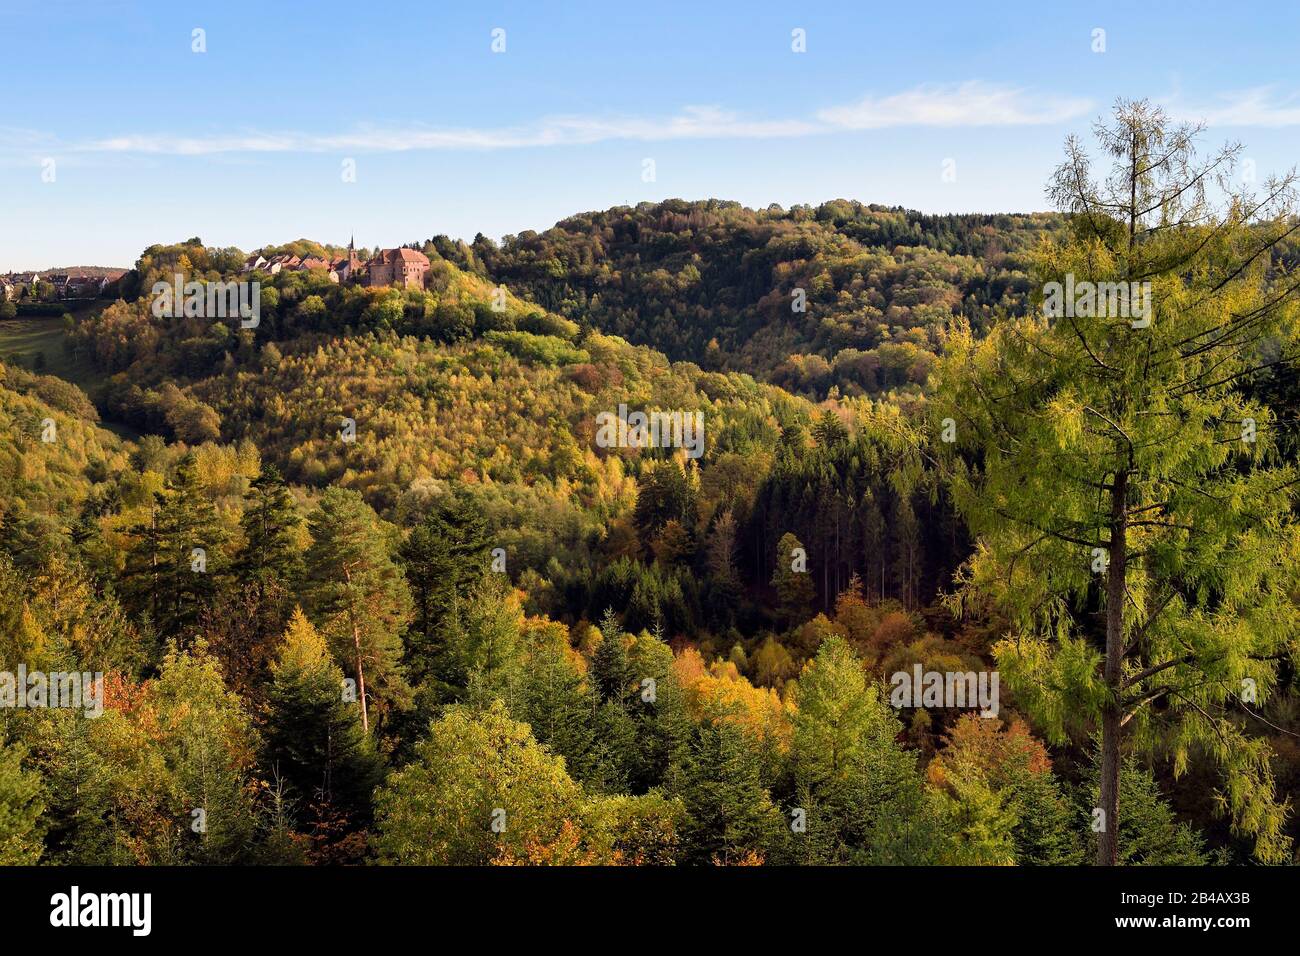 France, Bas-Rhin, Parc regional des Vosges du nord (Northern Vosges Regional Natural Park), La Petite Pierre, the Rocher Blanc (White Rock) which allows to enjoy a beautiful view of the old town and the Chateau Stock Photo